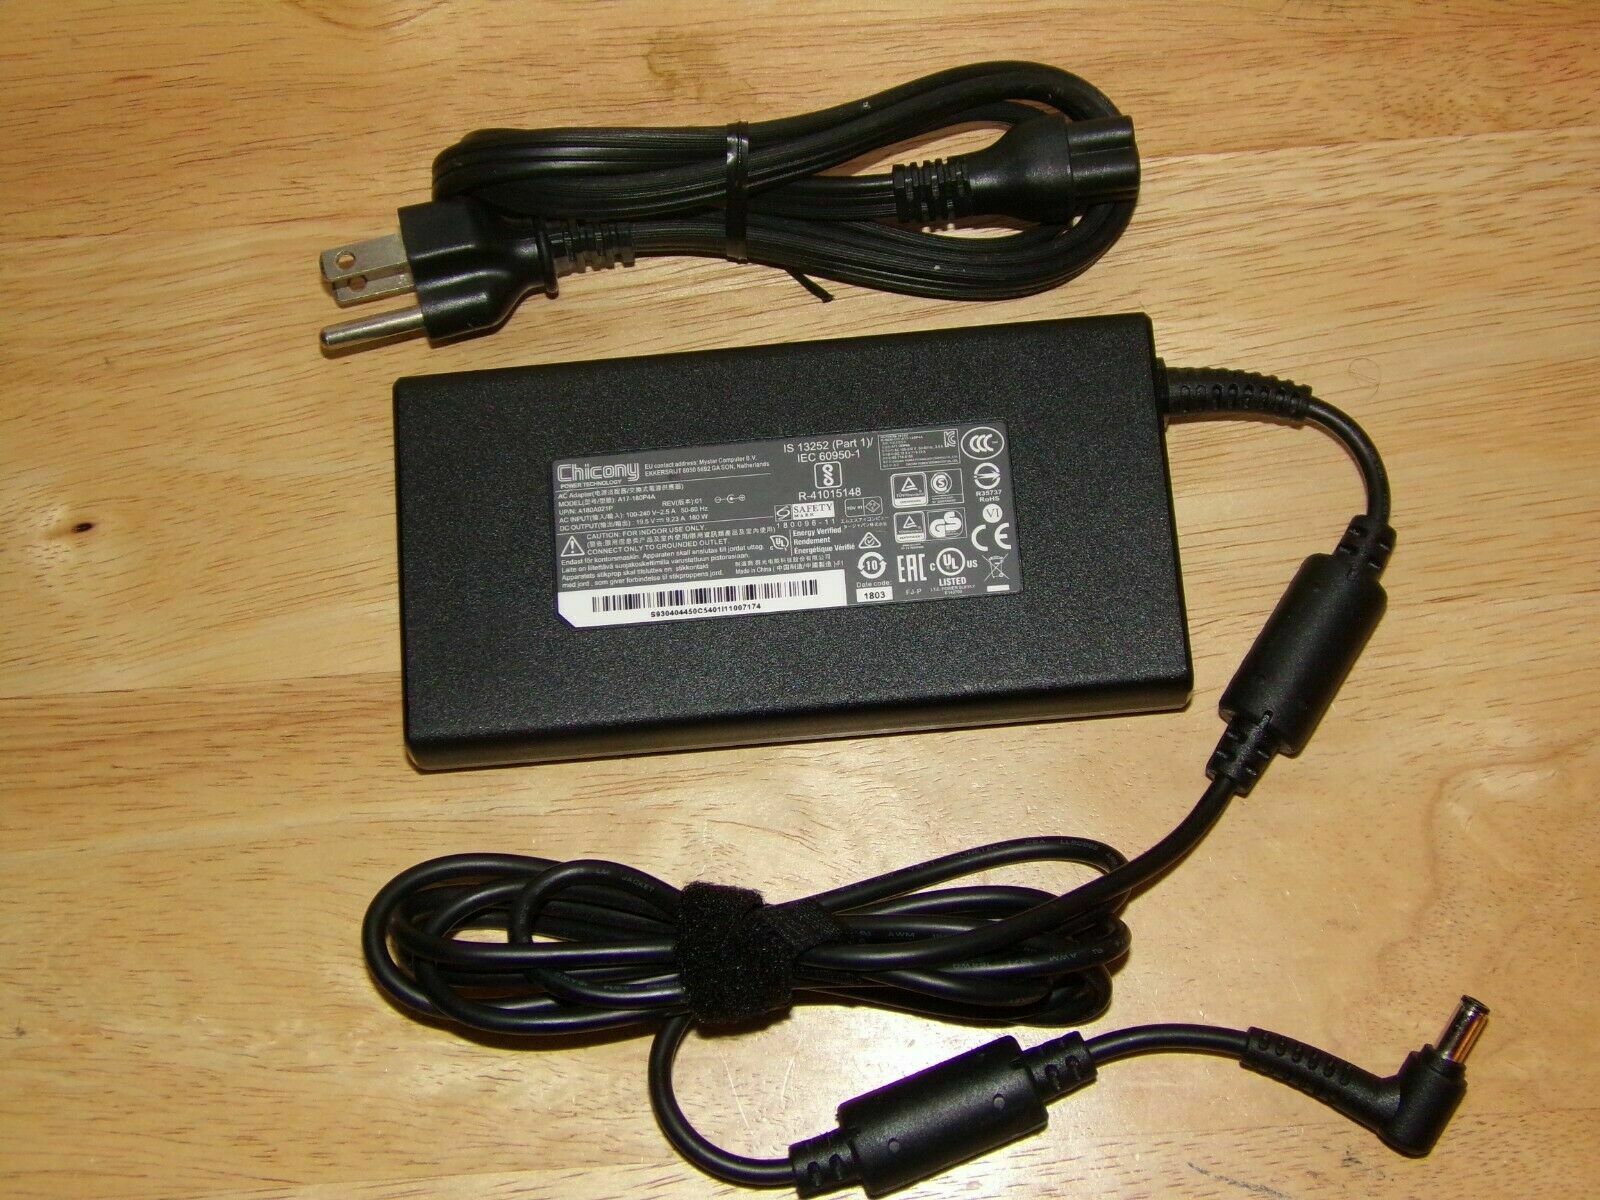 New Original Chicony 19.5V 9.23A AC Adapter for MSI GV62 8RE-015US Gaming Laptop Country/Region of Manufacture: China